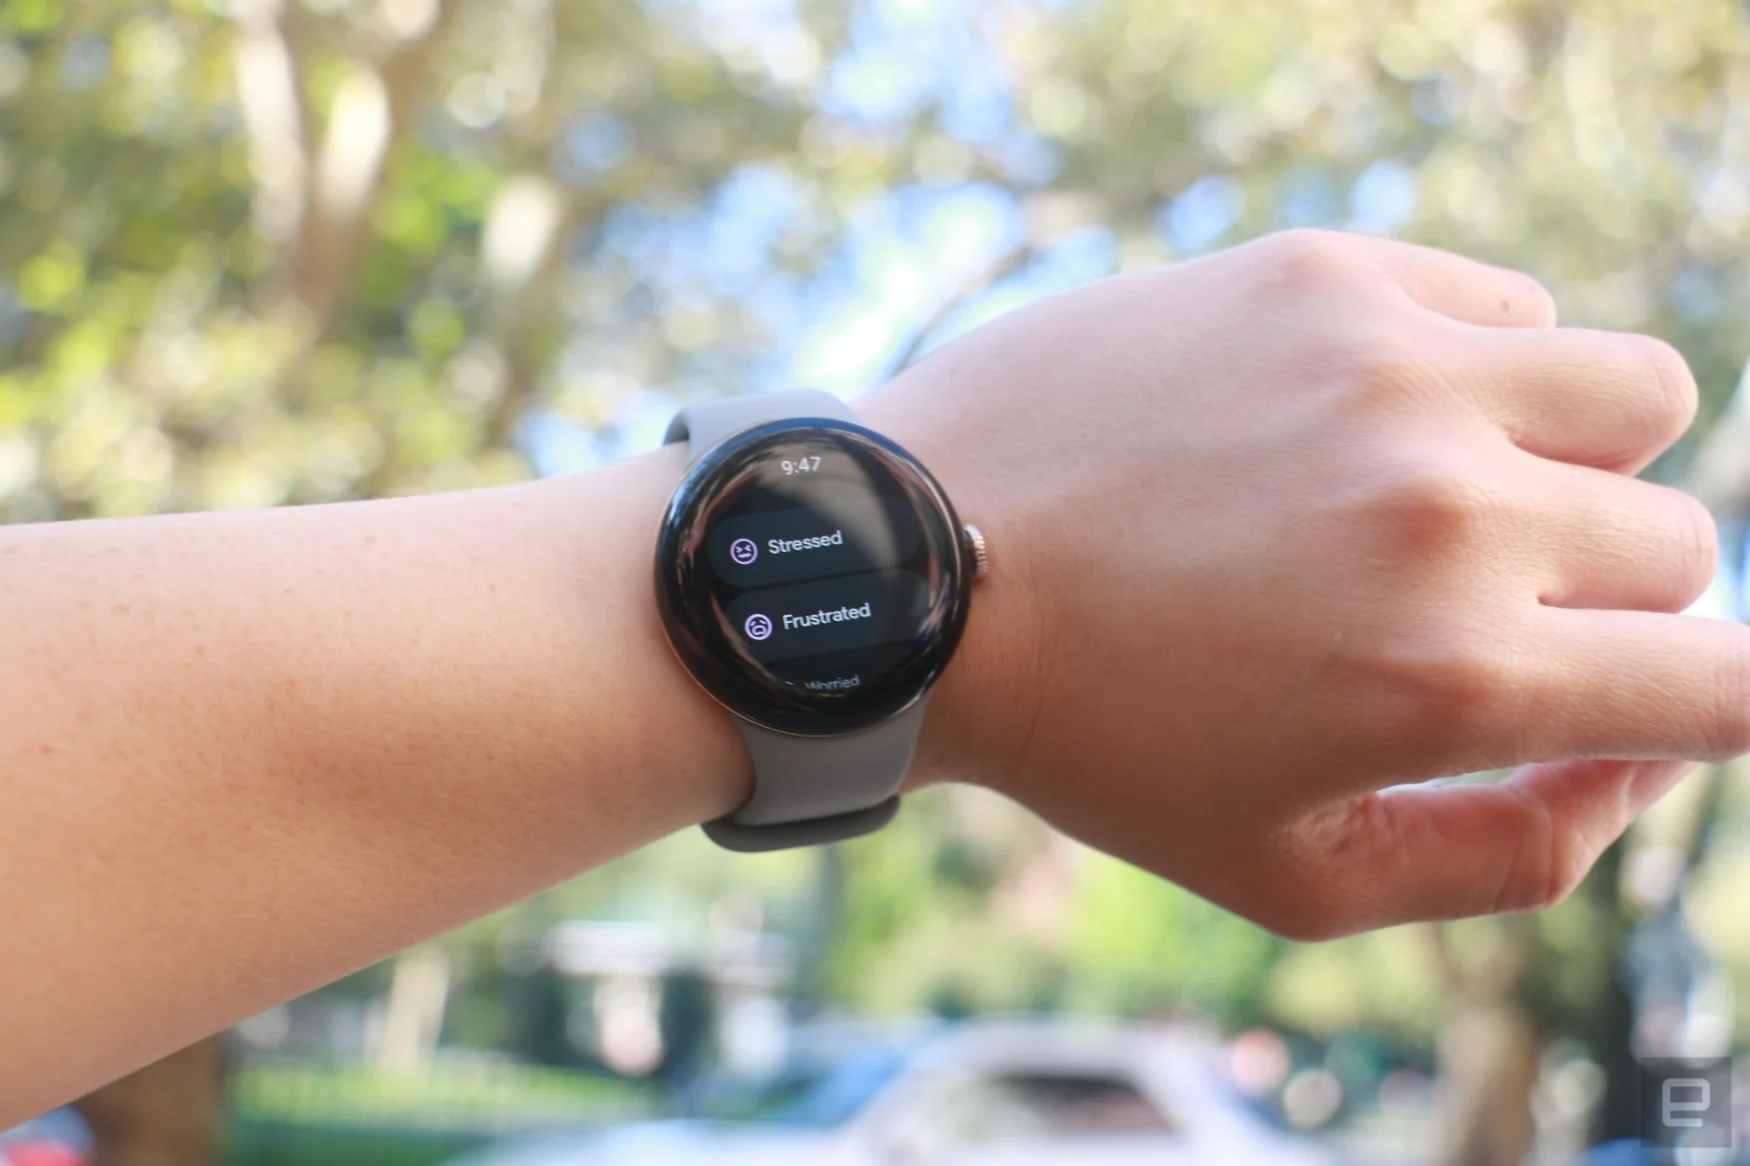 The Pixel Watch 2 on a person's wrist held up in mid-air, with some of the surrounding scenery reflecting off the screen. On the display are options for logging the user's mood, including the words 